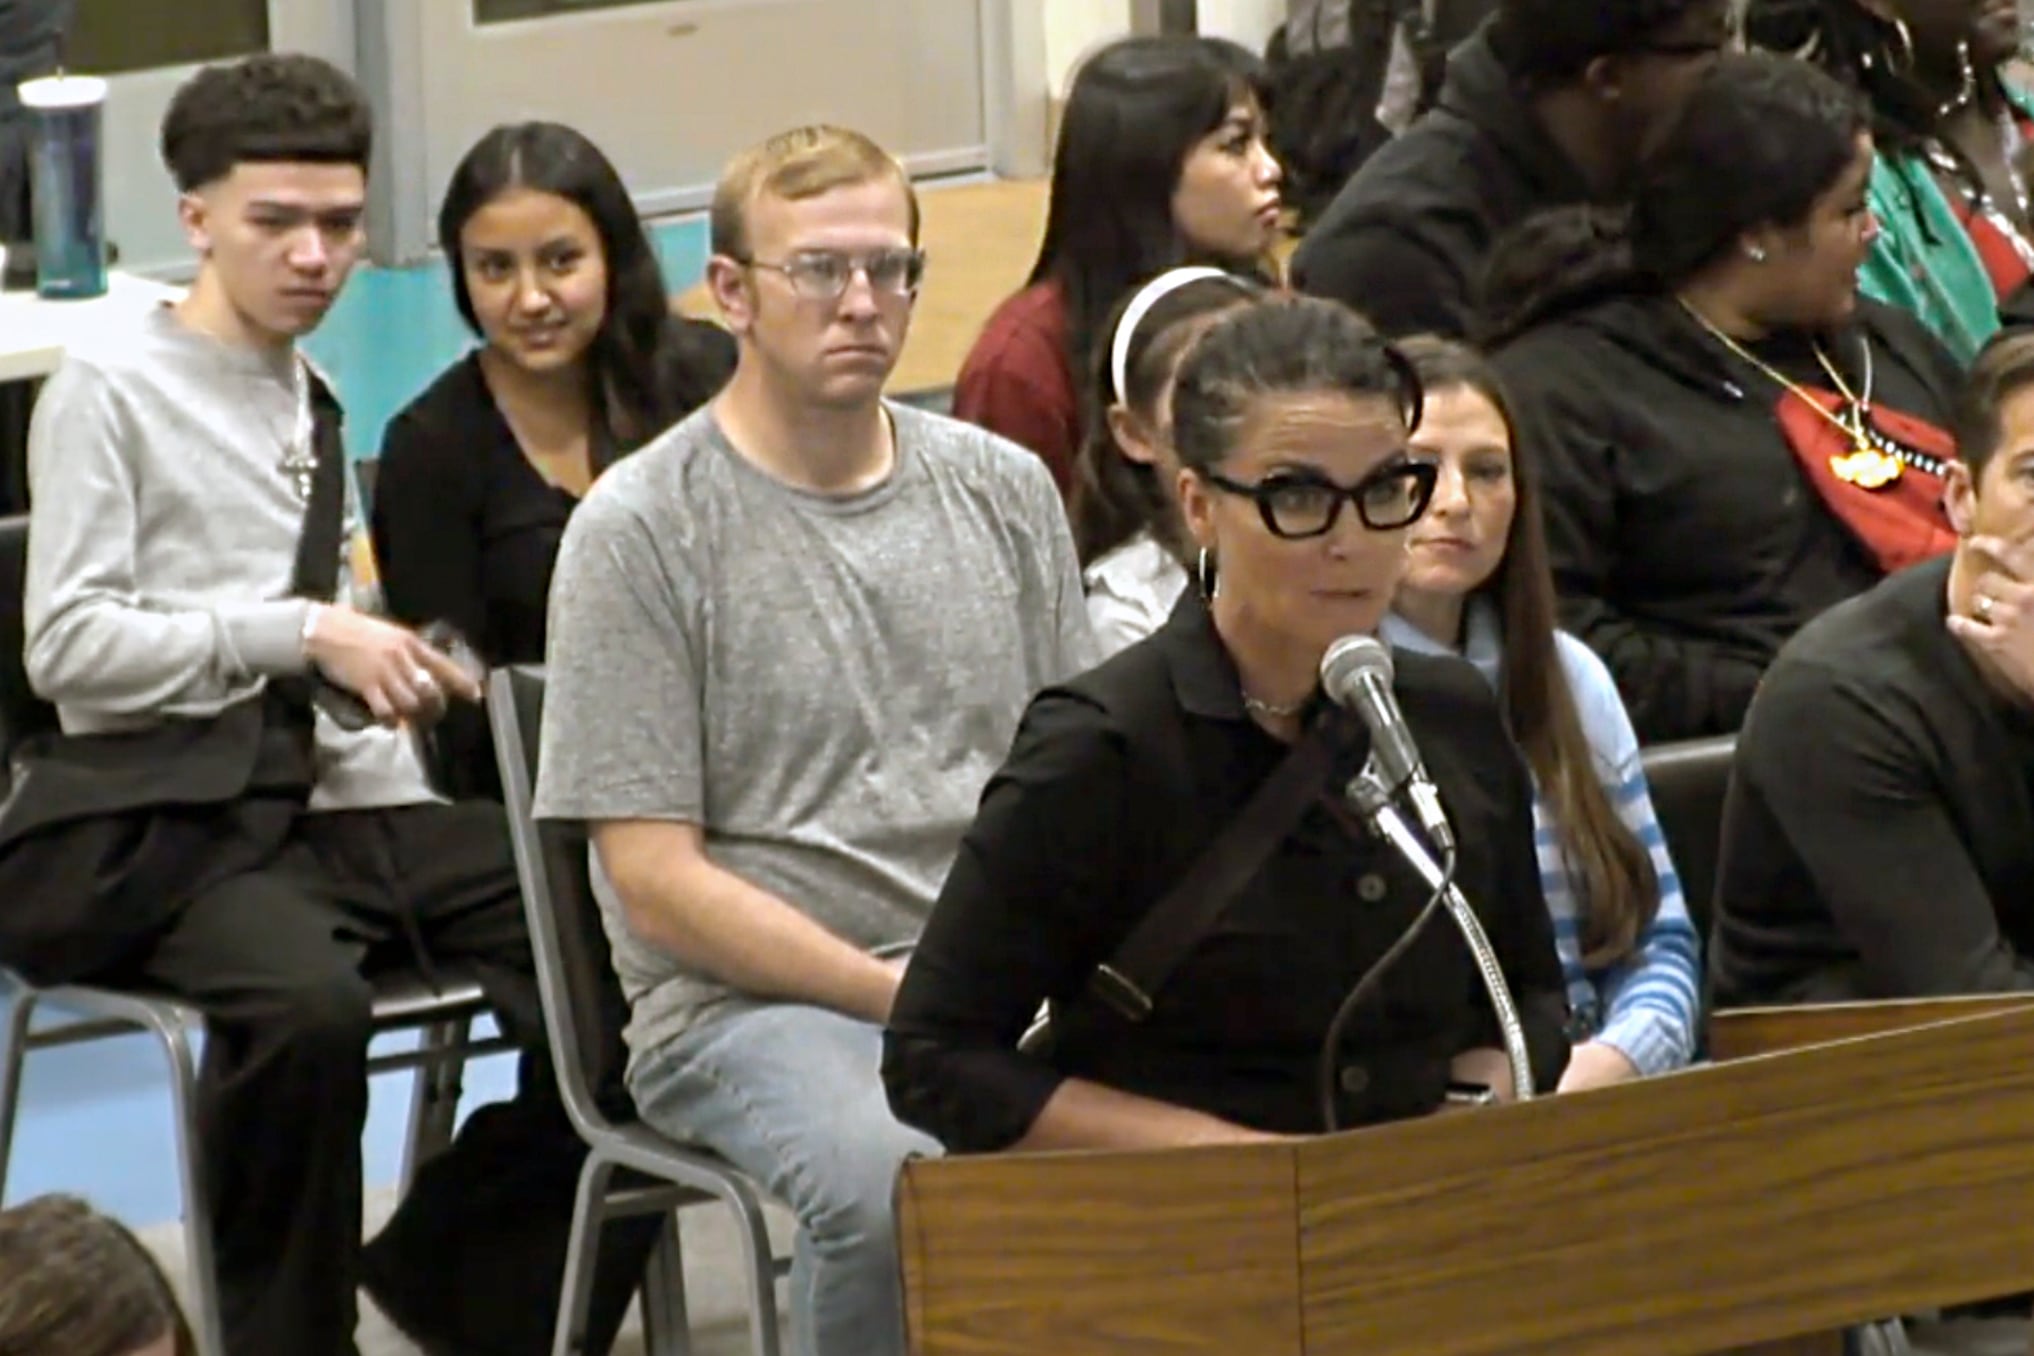 A woman with black glasses and a black shirt stands at a podium speaking into a microphone while a crowd of people sit in chairs in the background.